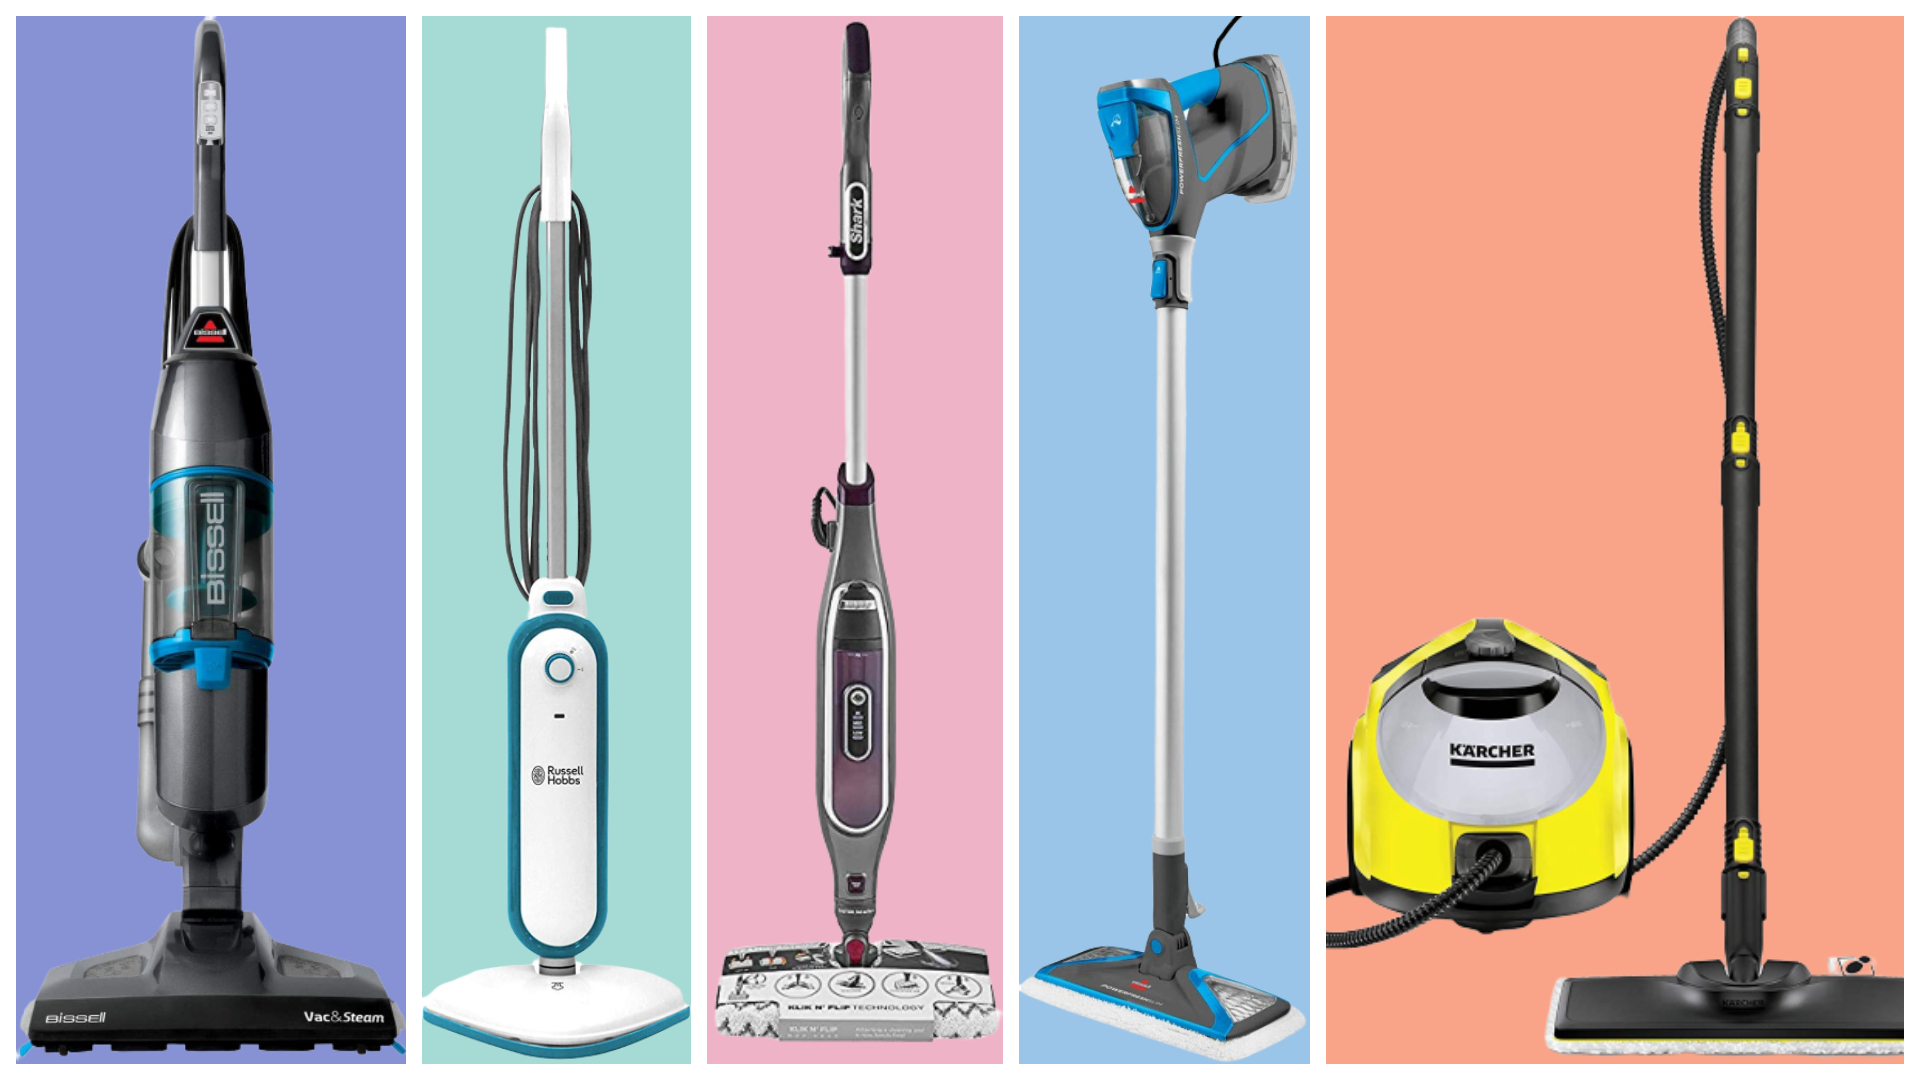 Best Steam Cleaners 2020 Great, The Best Steam Cleaner For Hardwood Floors